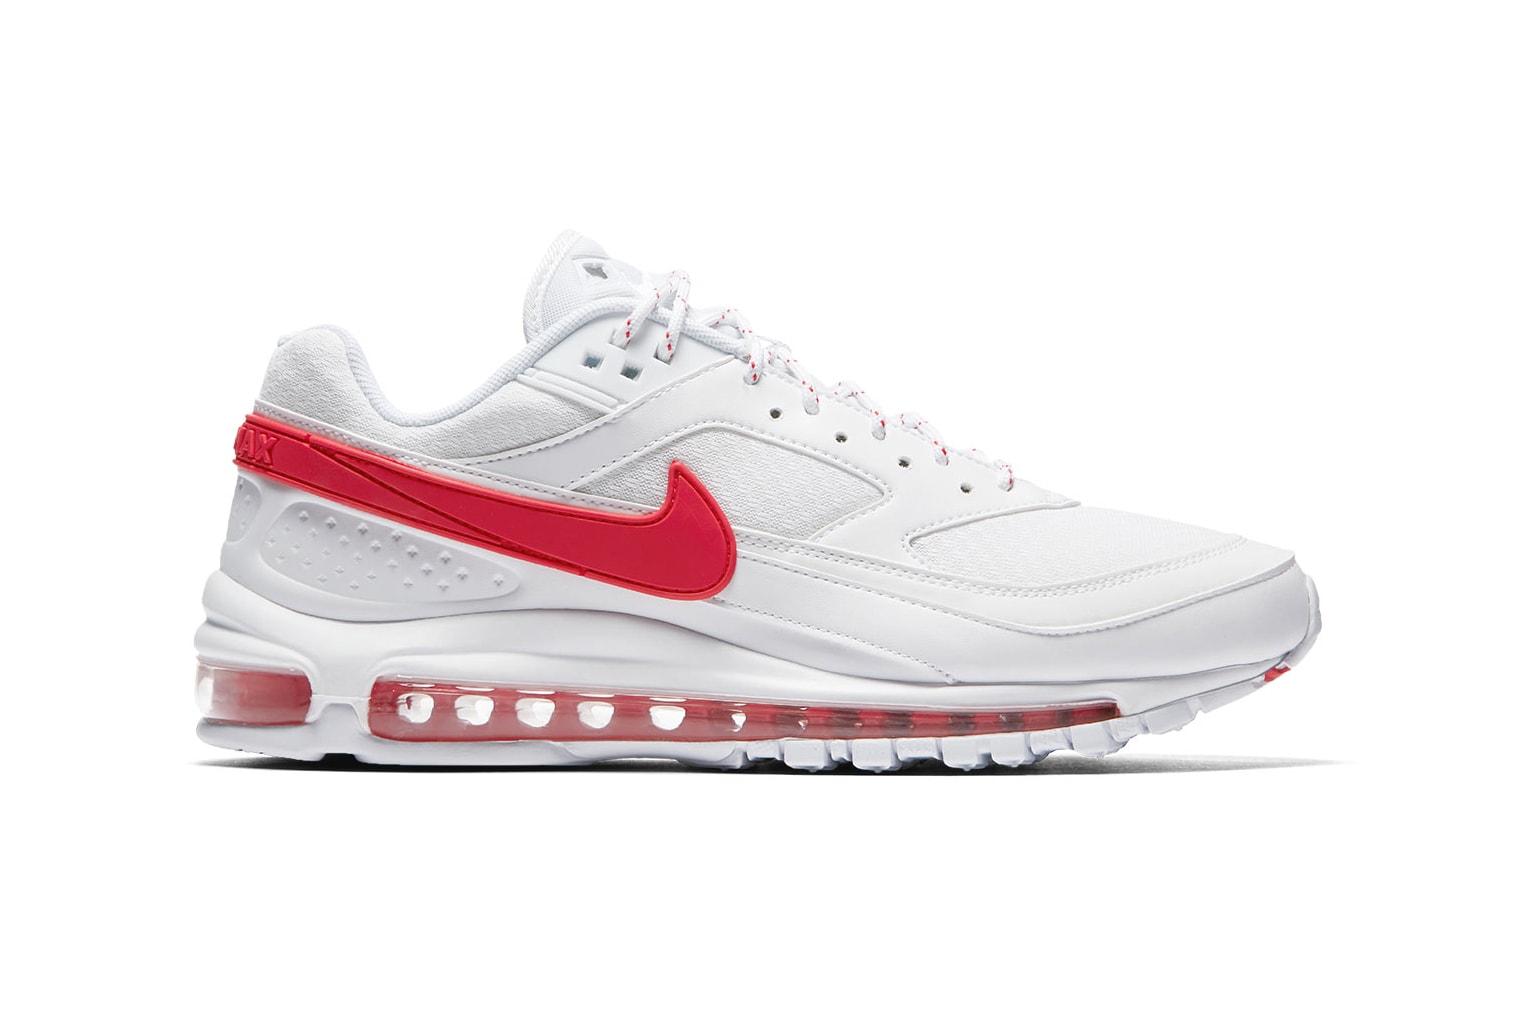 Skepta x Nike Air Max 97 Classic BW Collaboration Closer Look Official Look END. Hybrid Red Blue White Release Information Price Register Raffle Details